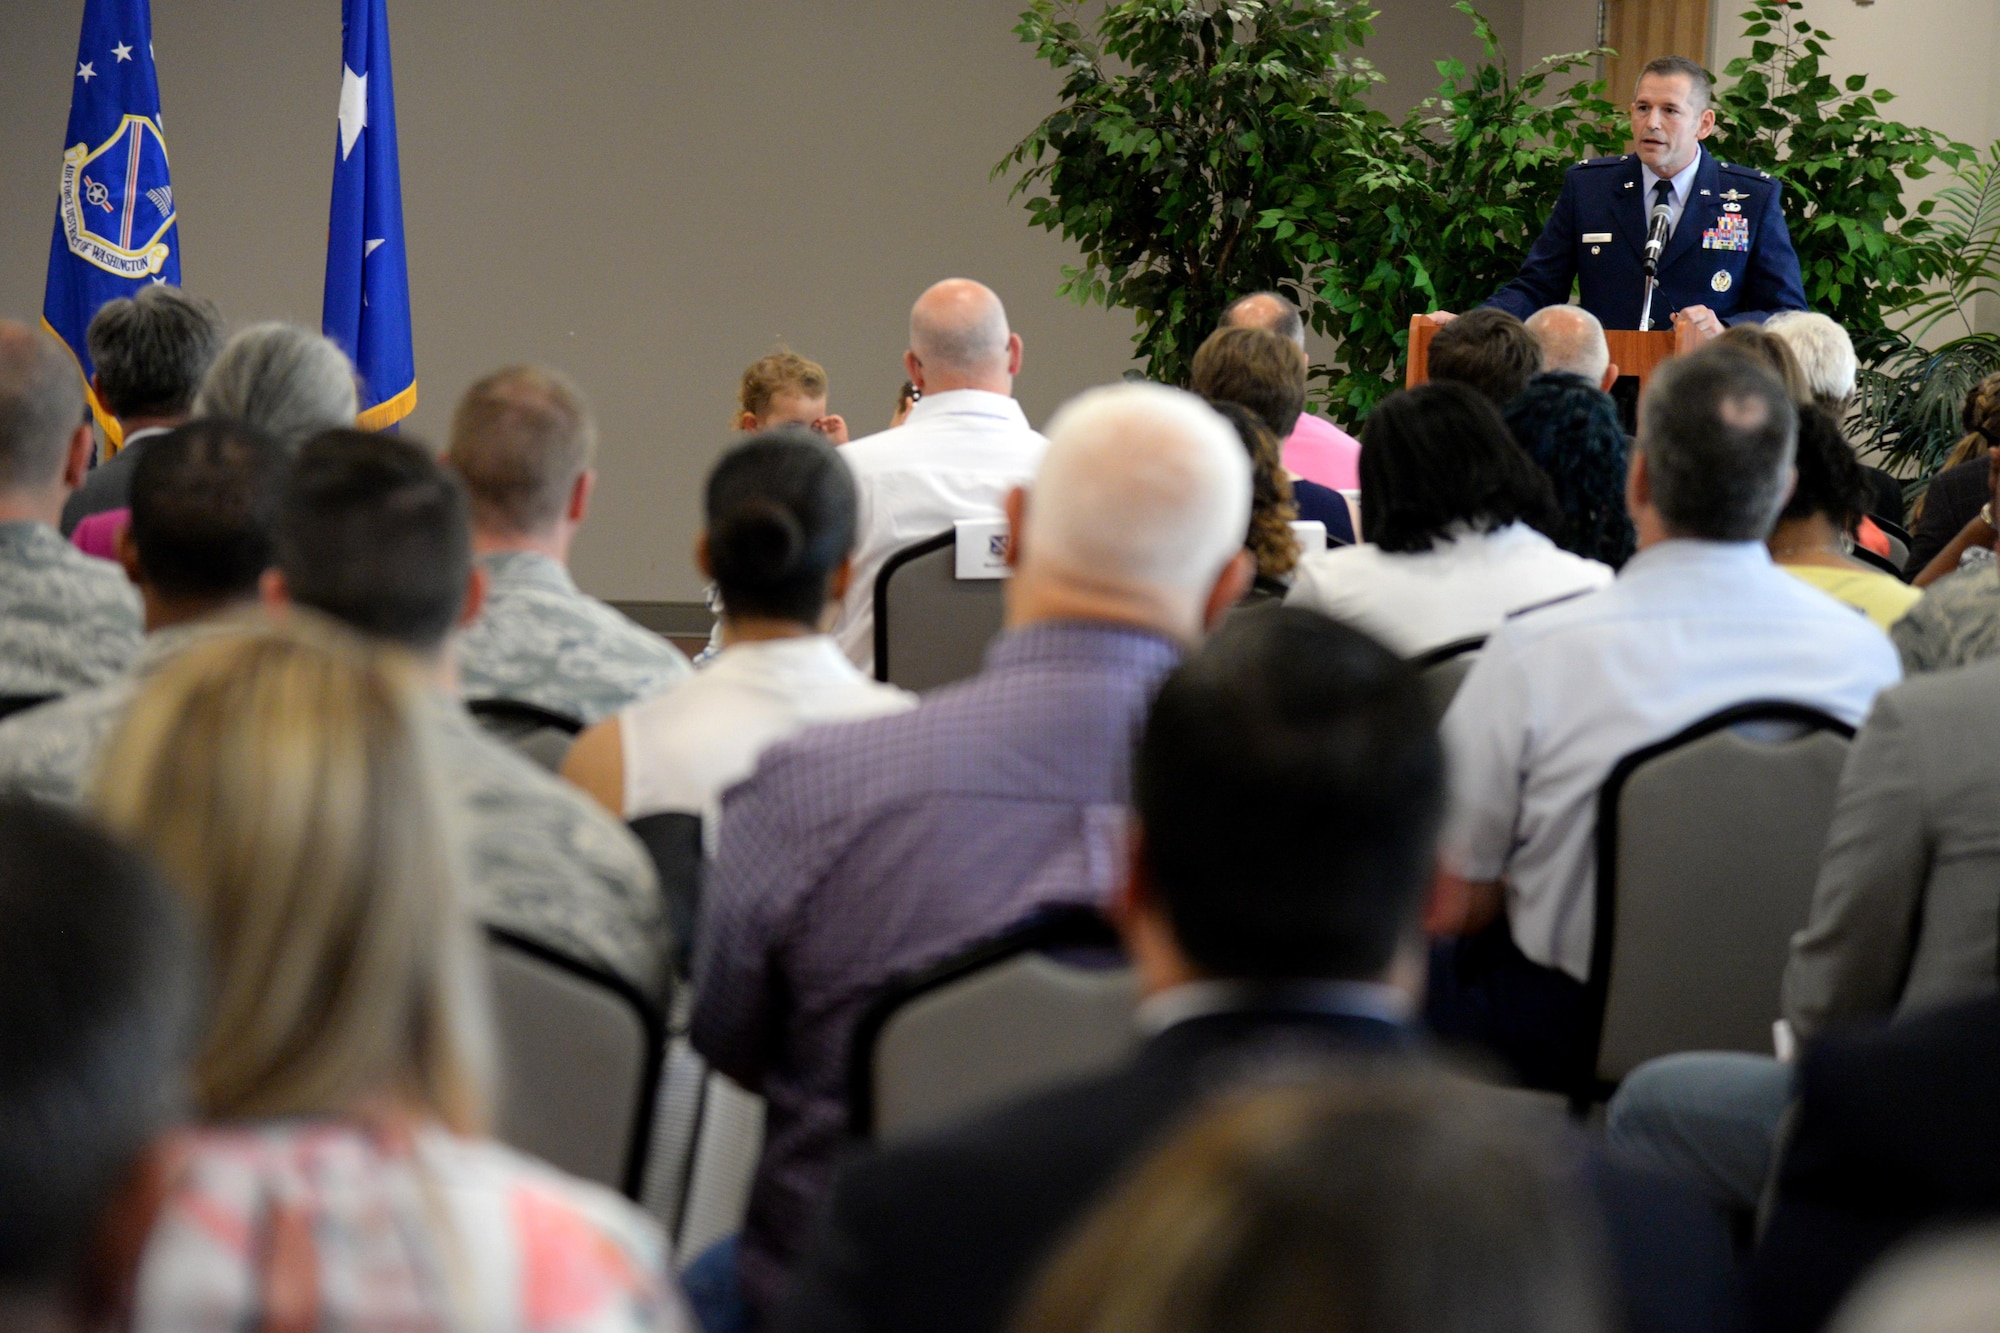 Col. Rocky Favorito speaks to the men and women of the 844th Communications Group during his change-of-command ceremony on Joint Base Andrews, Md., May 26, 2016. The 844th Communications Group provides communications and information support to Air Force National Capitol Region warfighters, including Headquarters Air Force District of Washington, the 11th Wing, 79th Medical Wing and various other organizations throughout the NCR. (U.S. Air Force photo/Tech. Sgt. Matt Davis) 